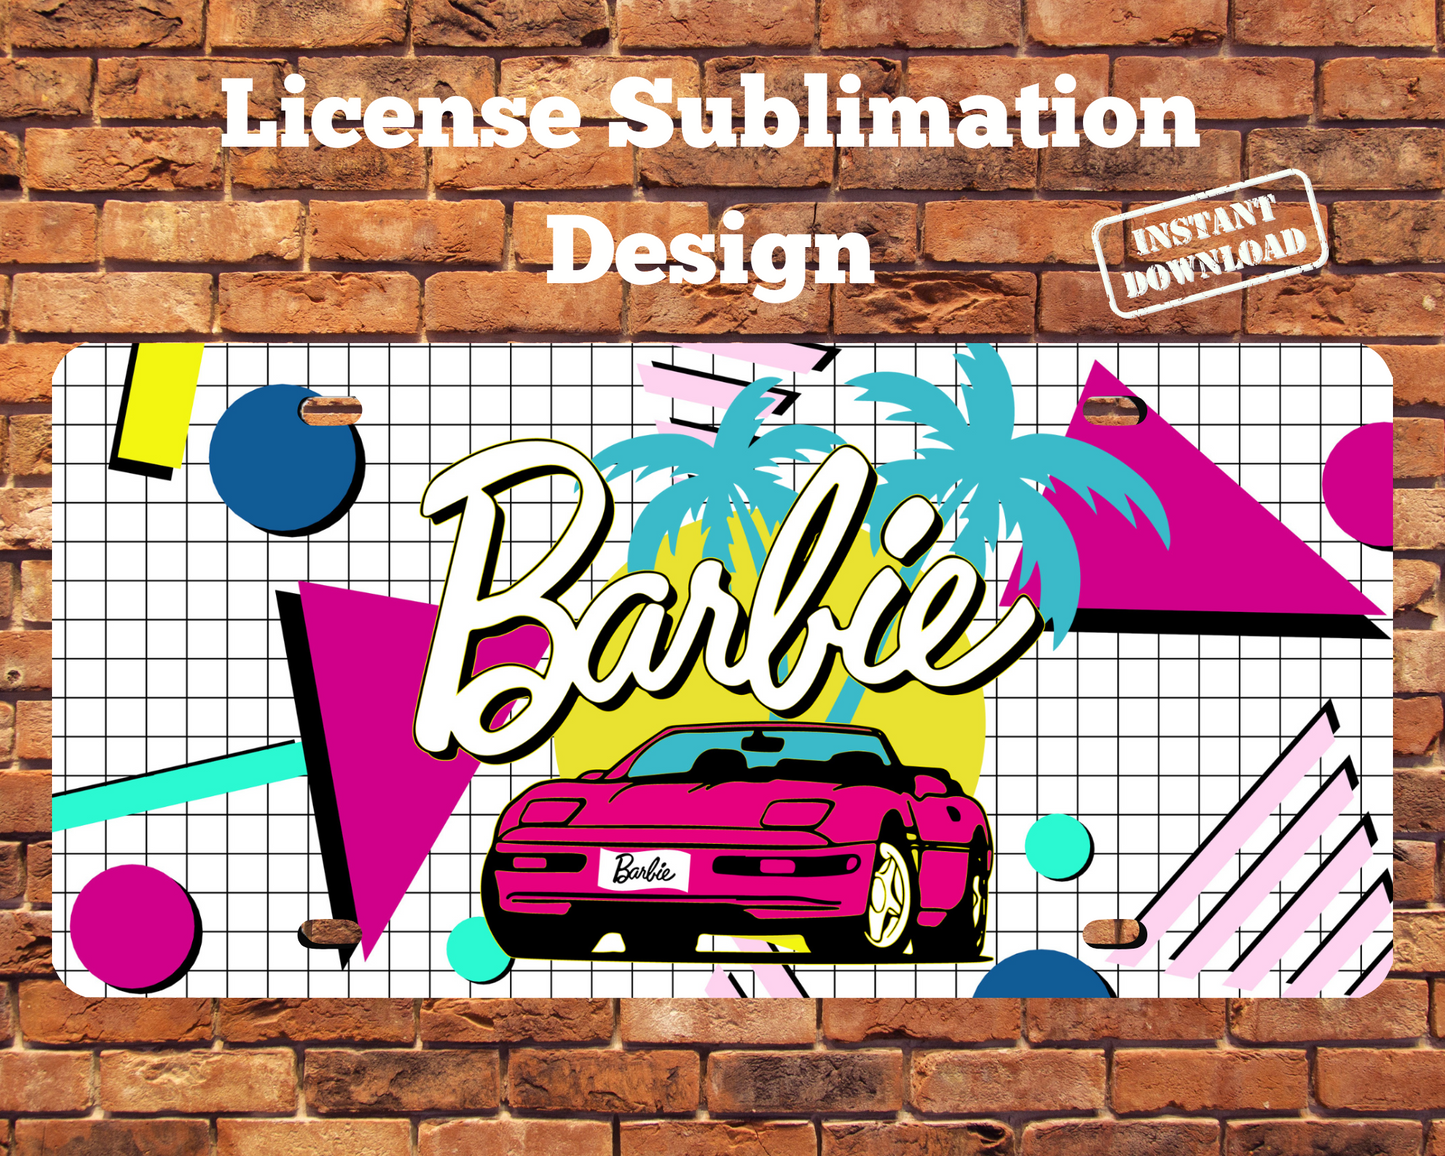 License plate cover, license plate ideas, license plate frames, license plate holder, license plate png, license plate suggestions, license plate sublimation, sublimation, sublimation designs, barbie, barbie poster, barbie movie, babrie background, amazon, etsy, etsy downloads, barbie showtimes